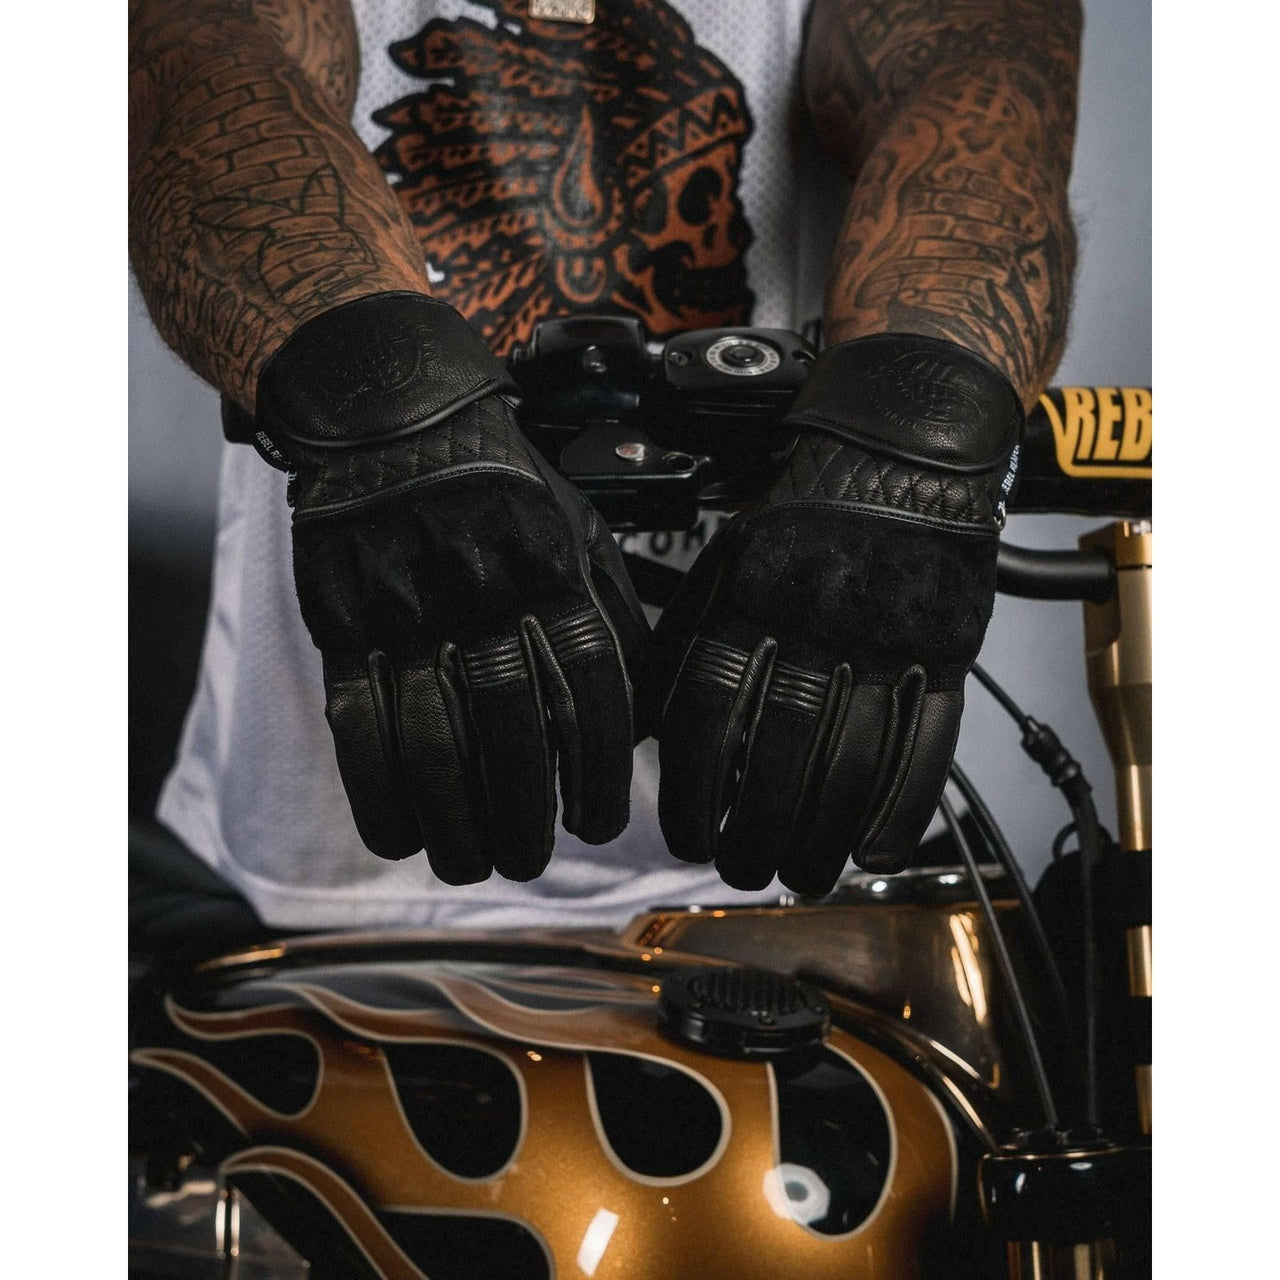 Leather Motorcycle Riding Gloves - Modern Roper - Black Suede - Rebel Reaper Clothing CompanyLeather Gloves